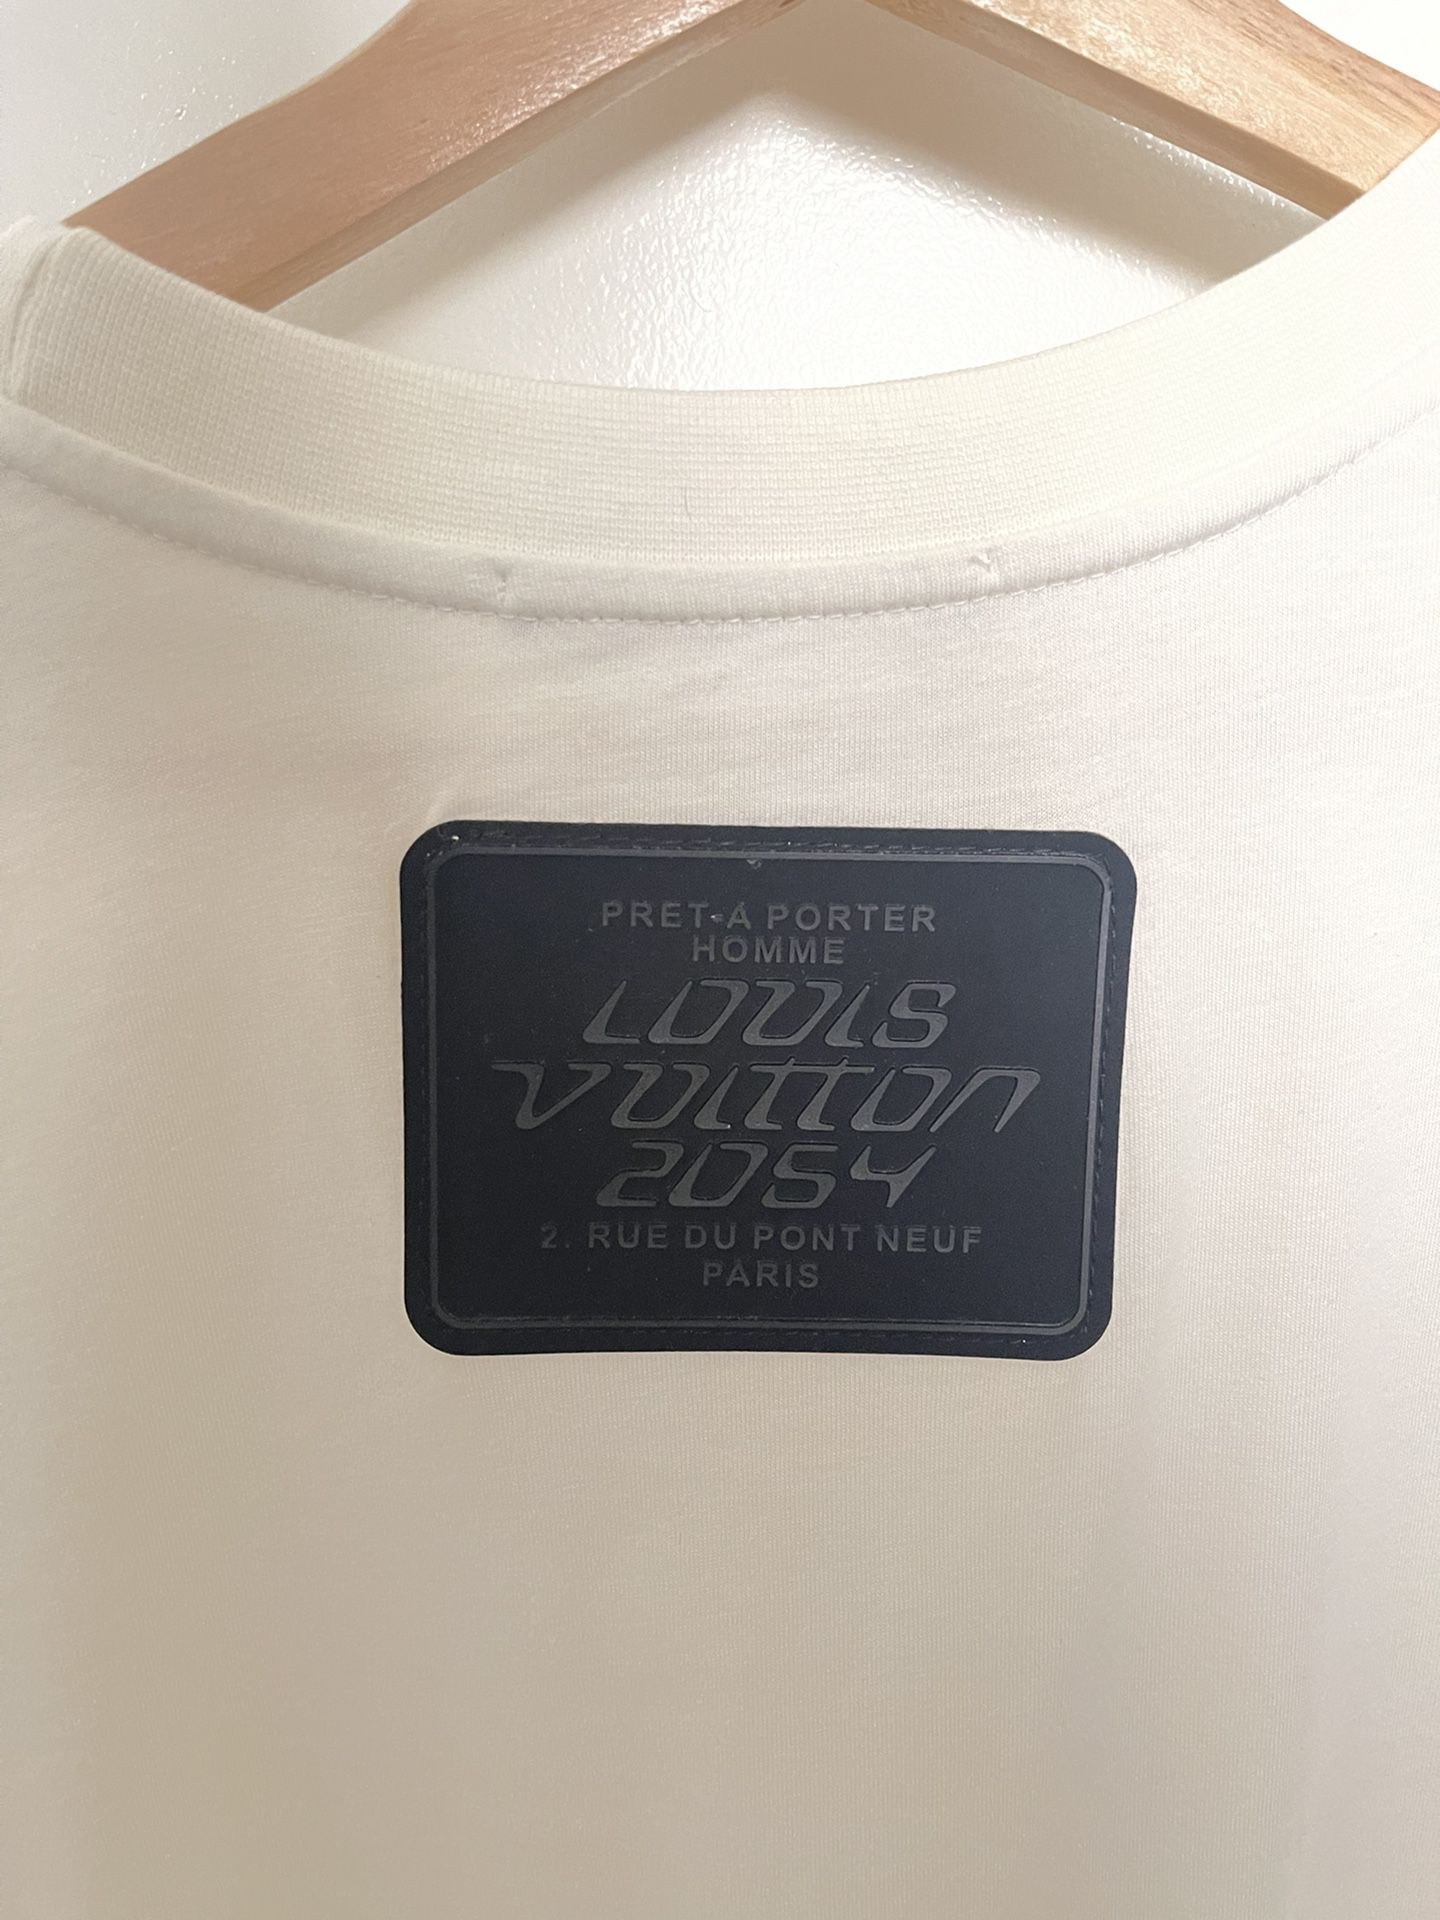 Louis Vuitton Airplane Tee - Size XL for Sale in Los Angeles, CA - OfferUp